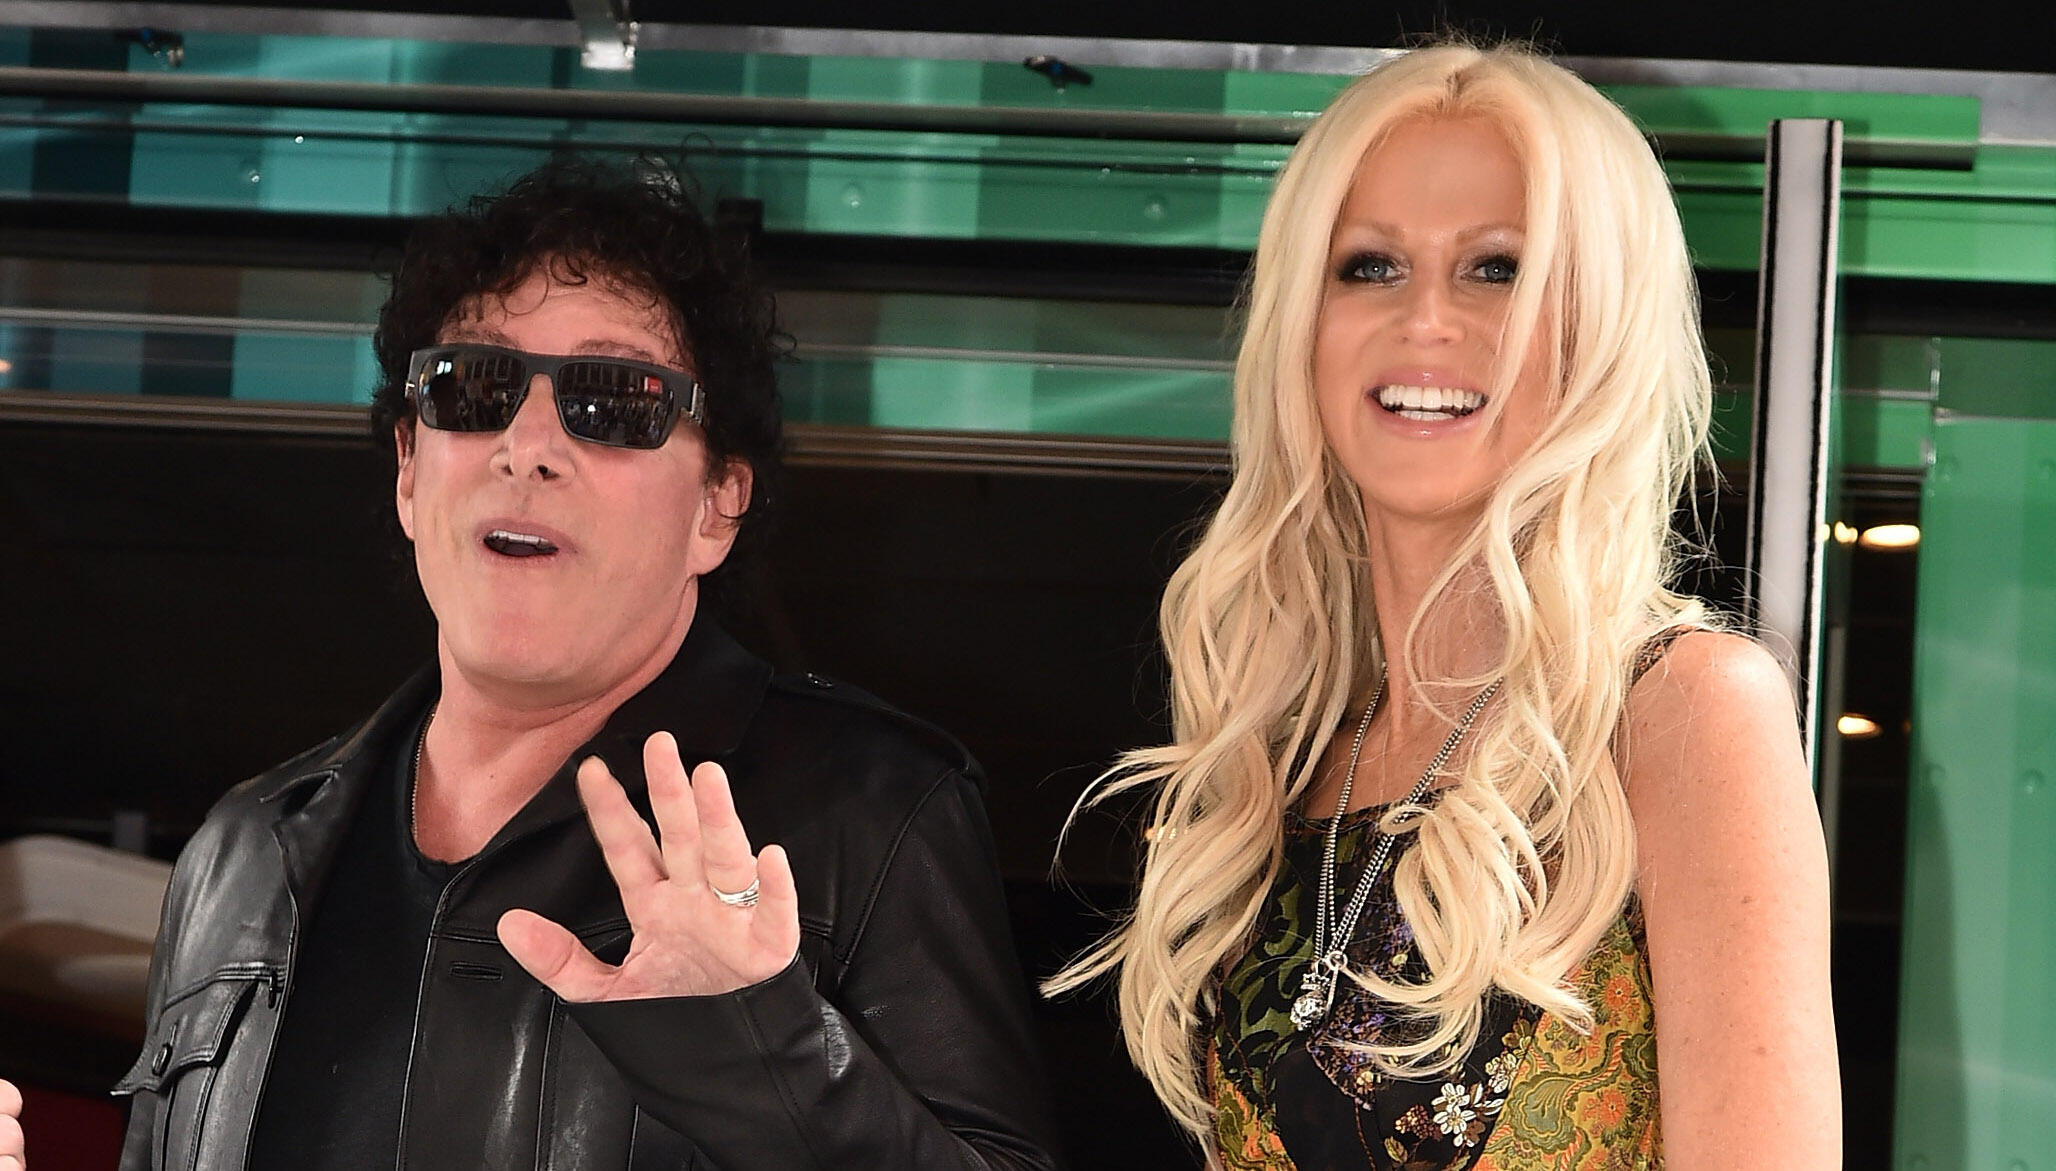 Neal Schon Suggests Conspiracy Against Himself and His Wife iHeart.